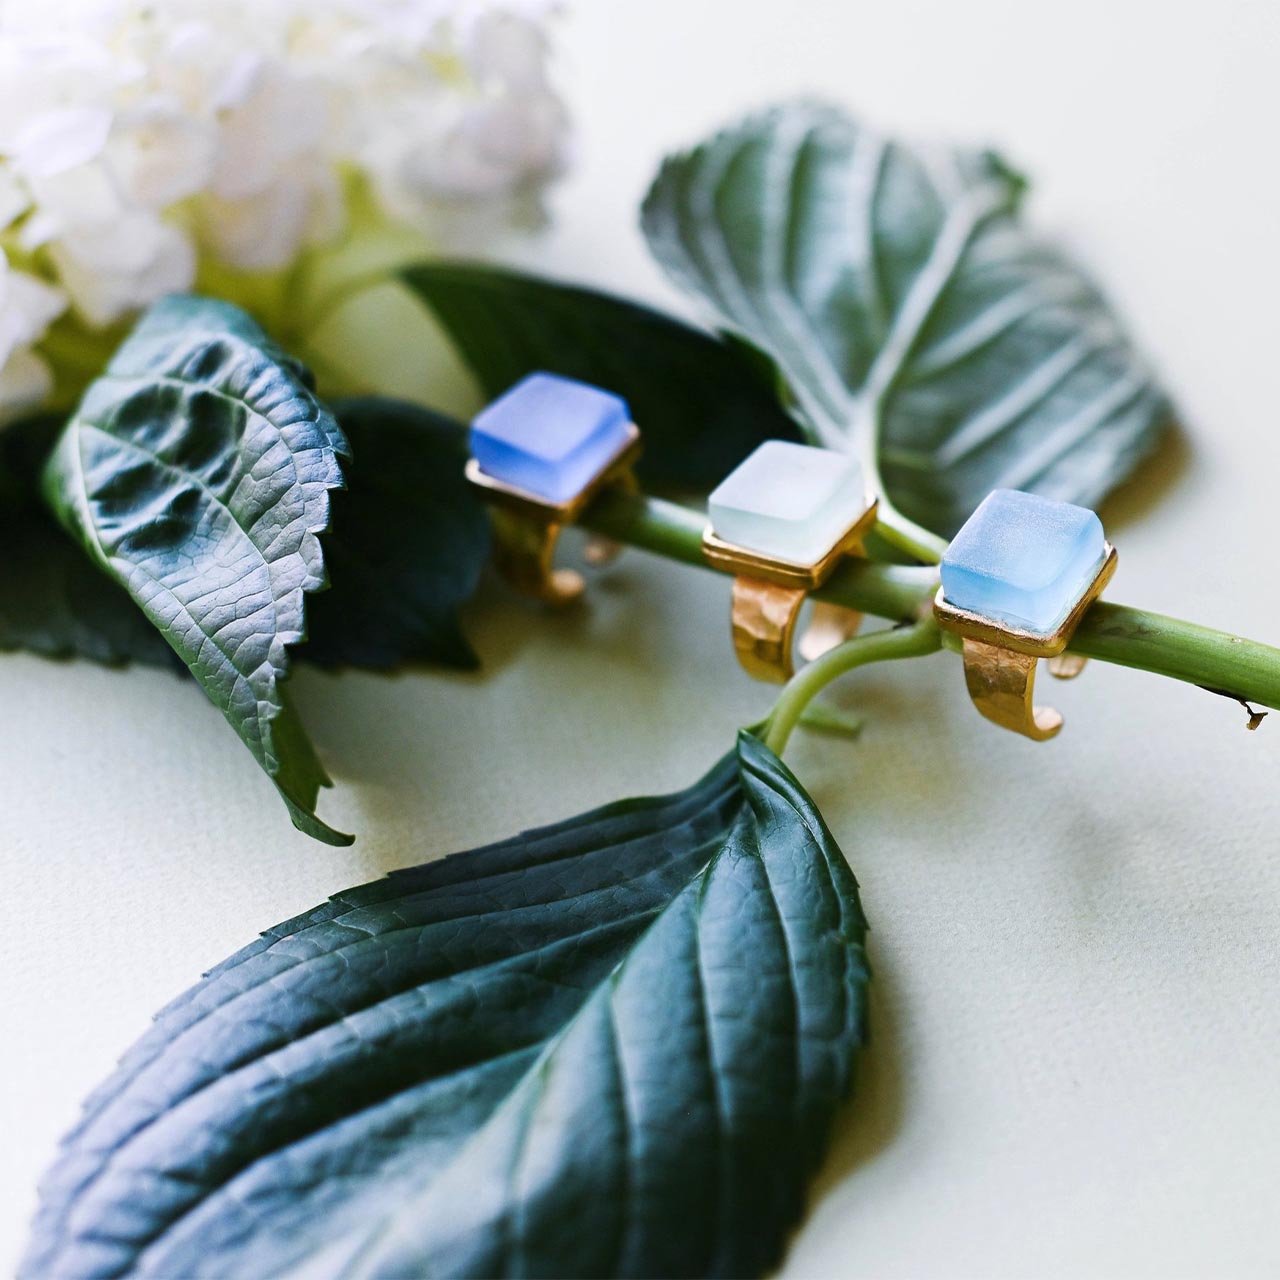 Three gold band rings with square blue stones sitting on the stem of a cut hydrangea